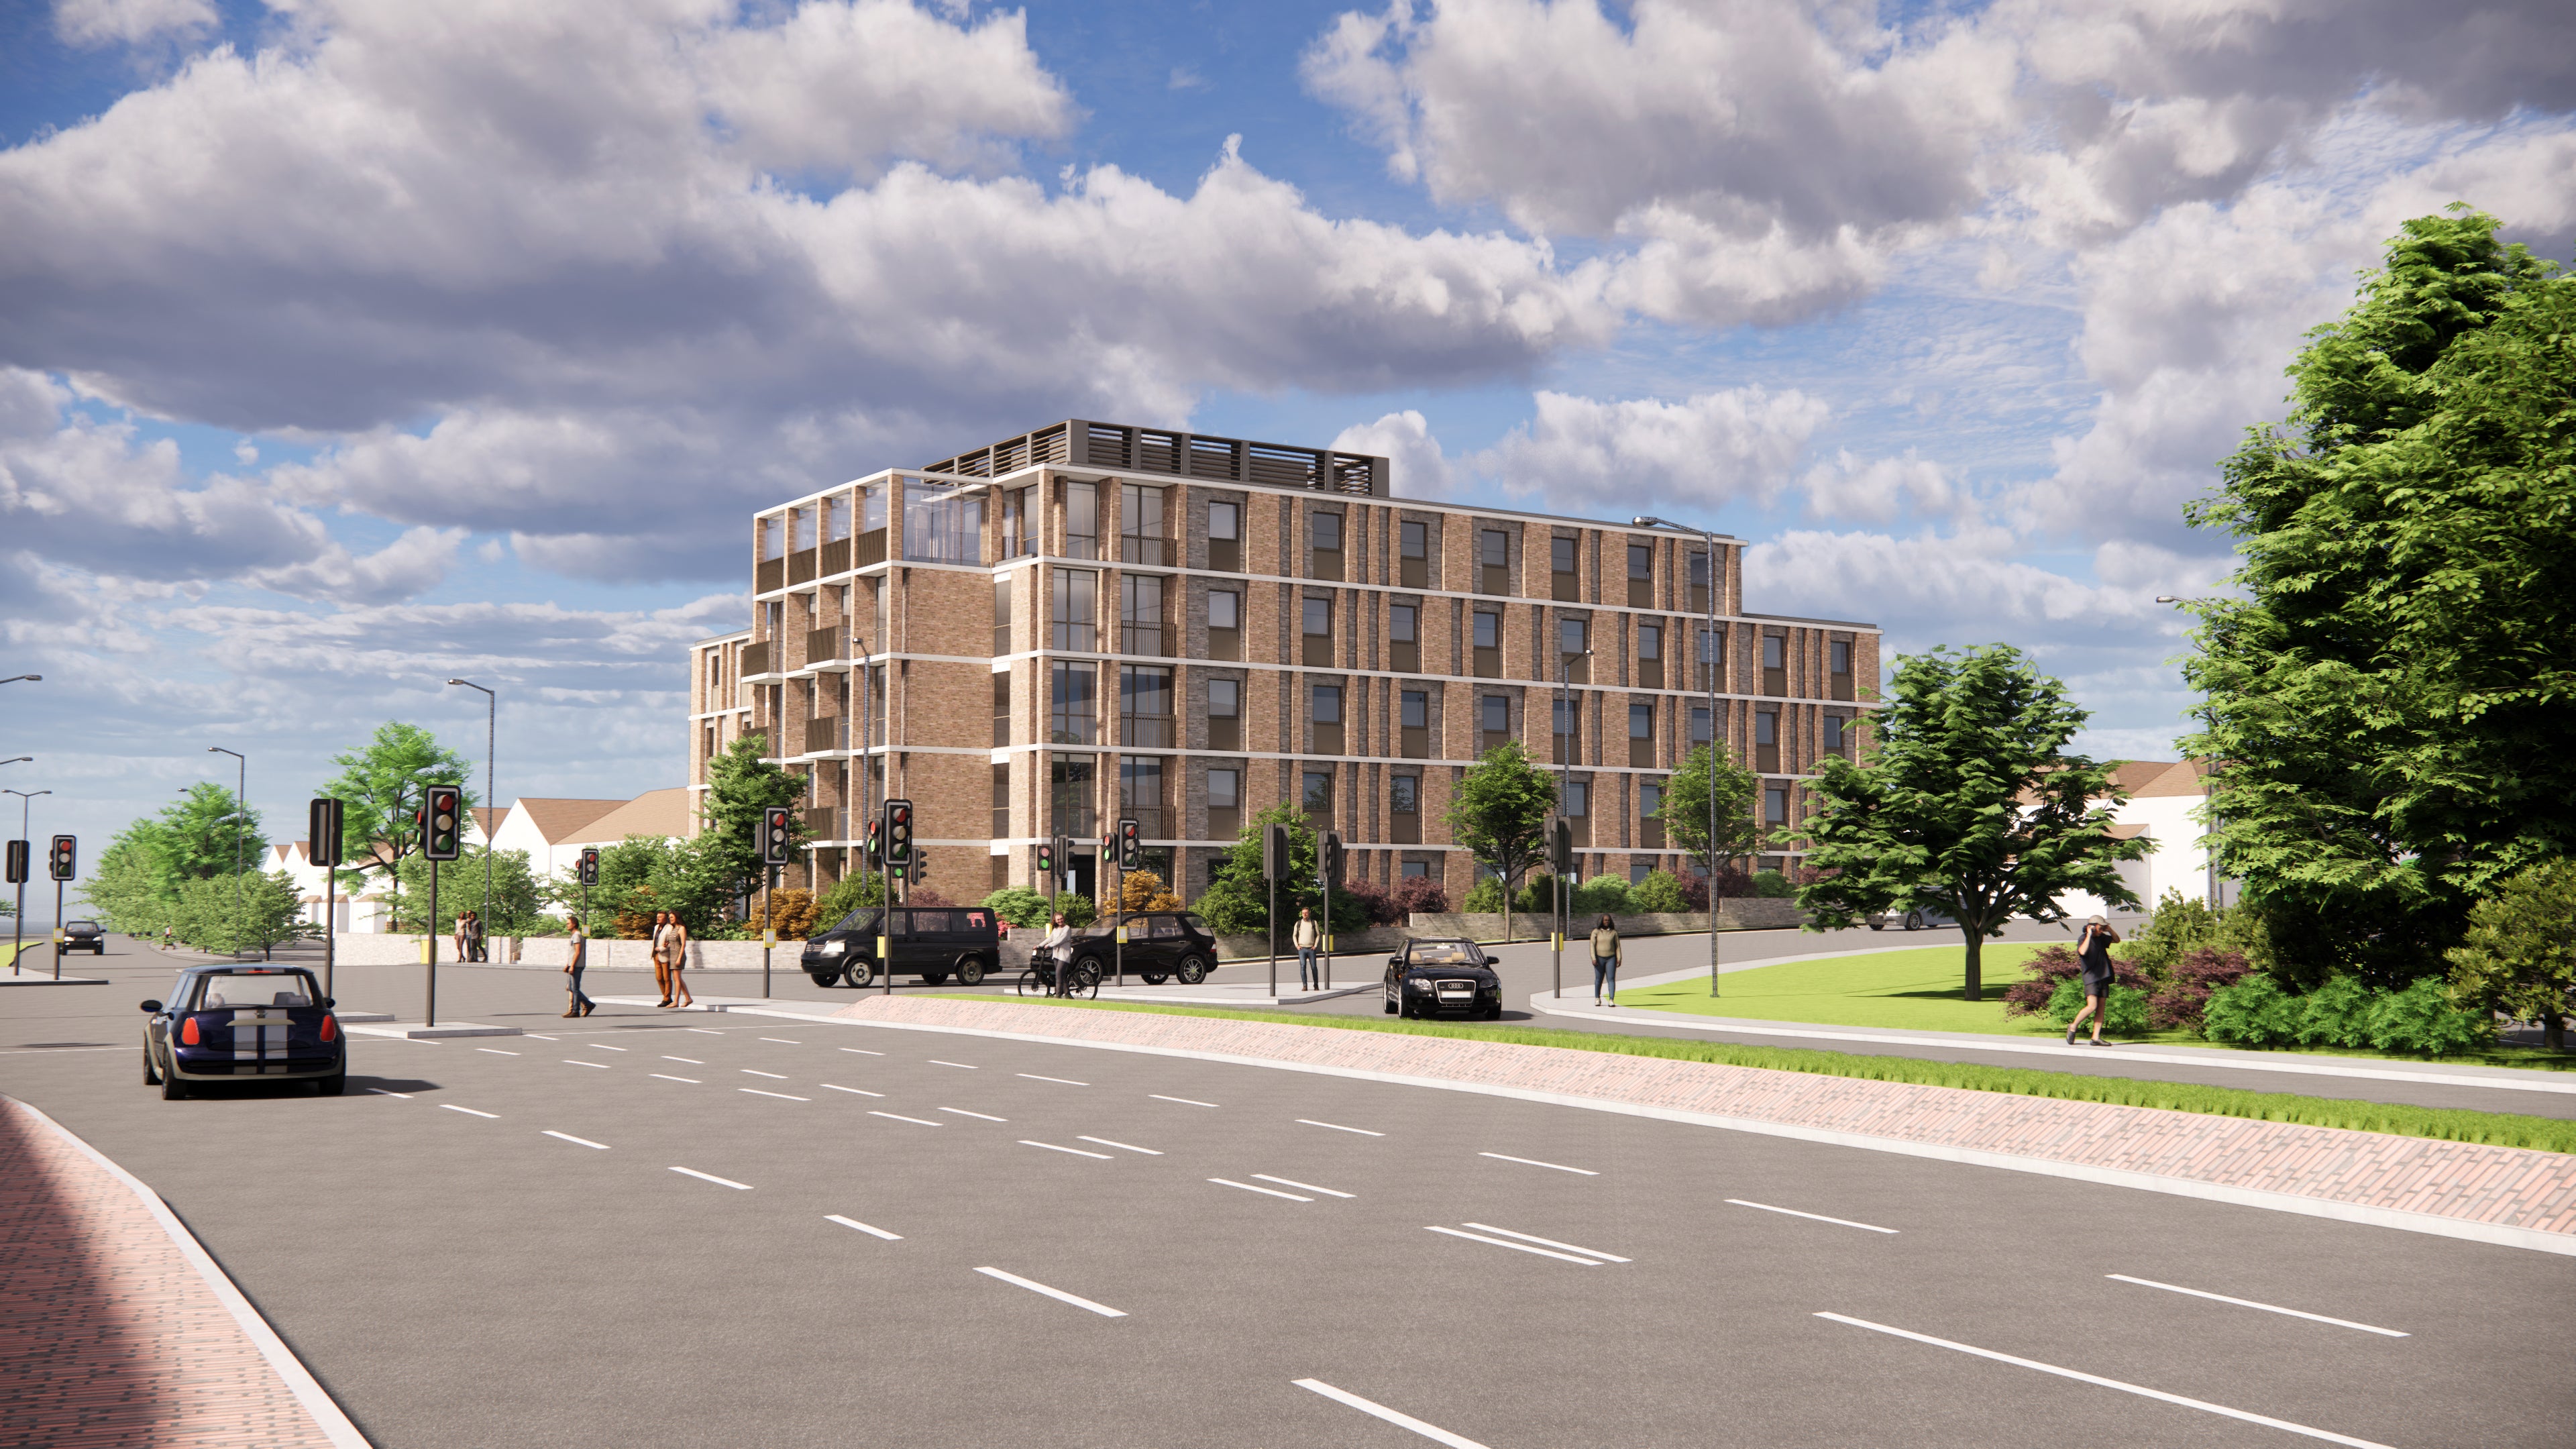 CGI for a care home scheme in Ewell, Surrey